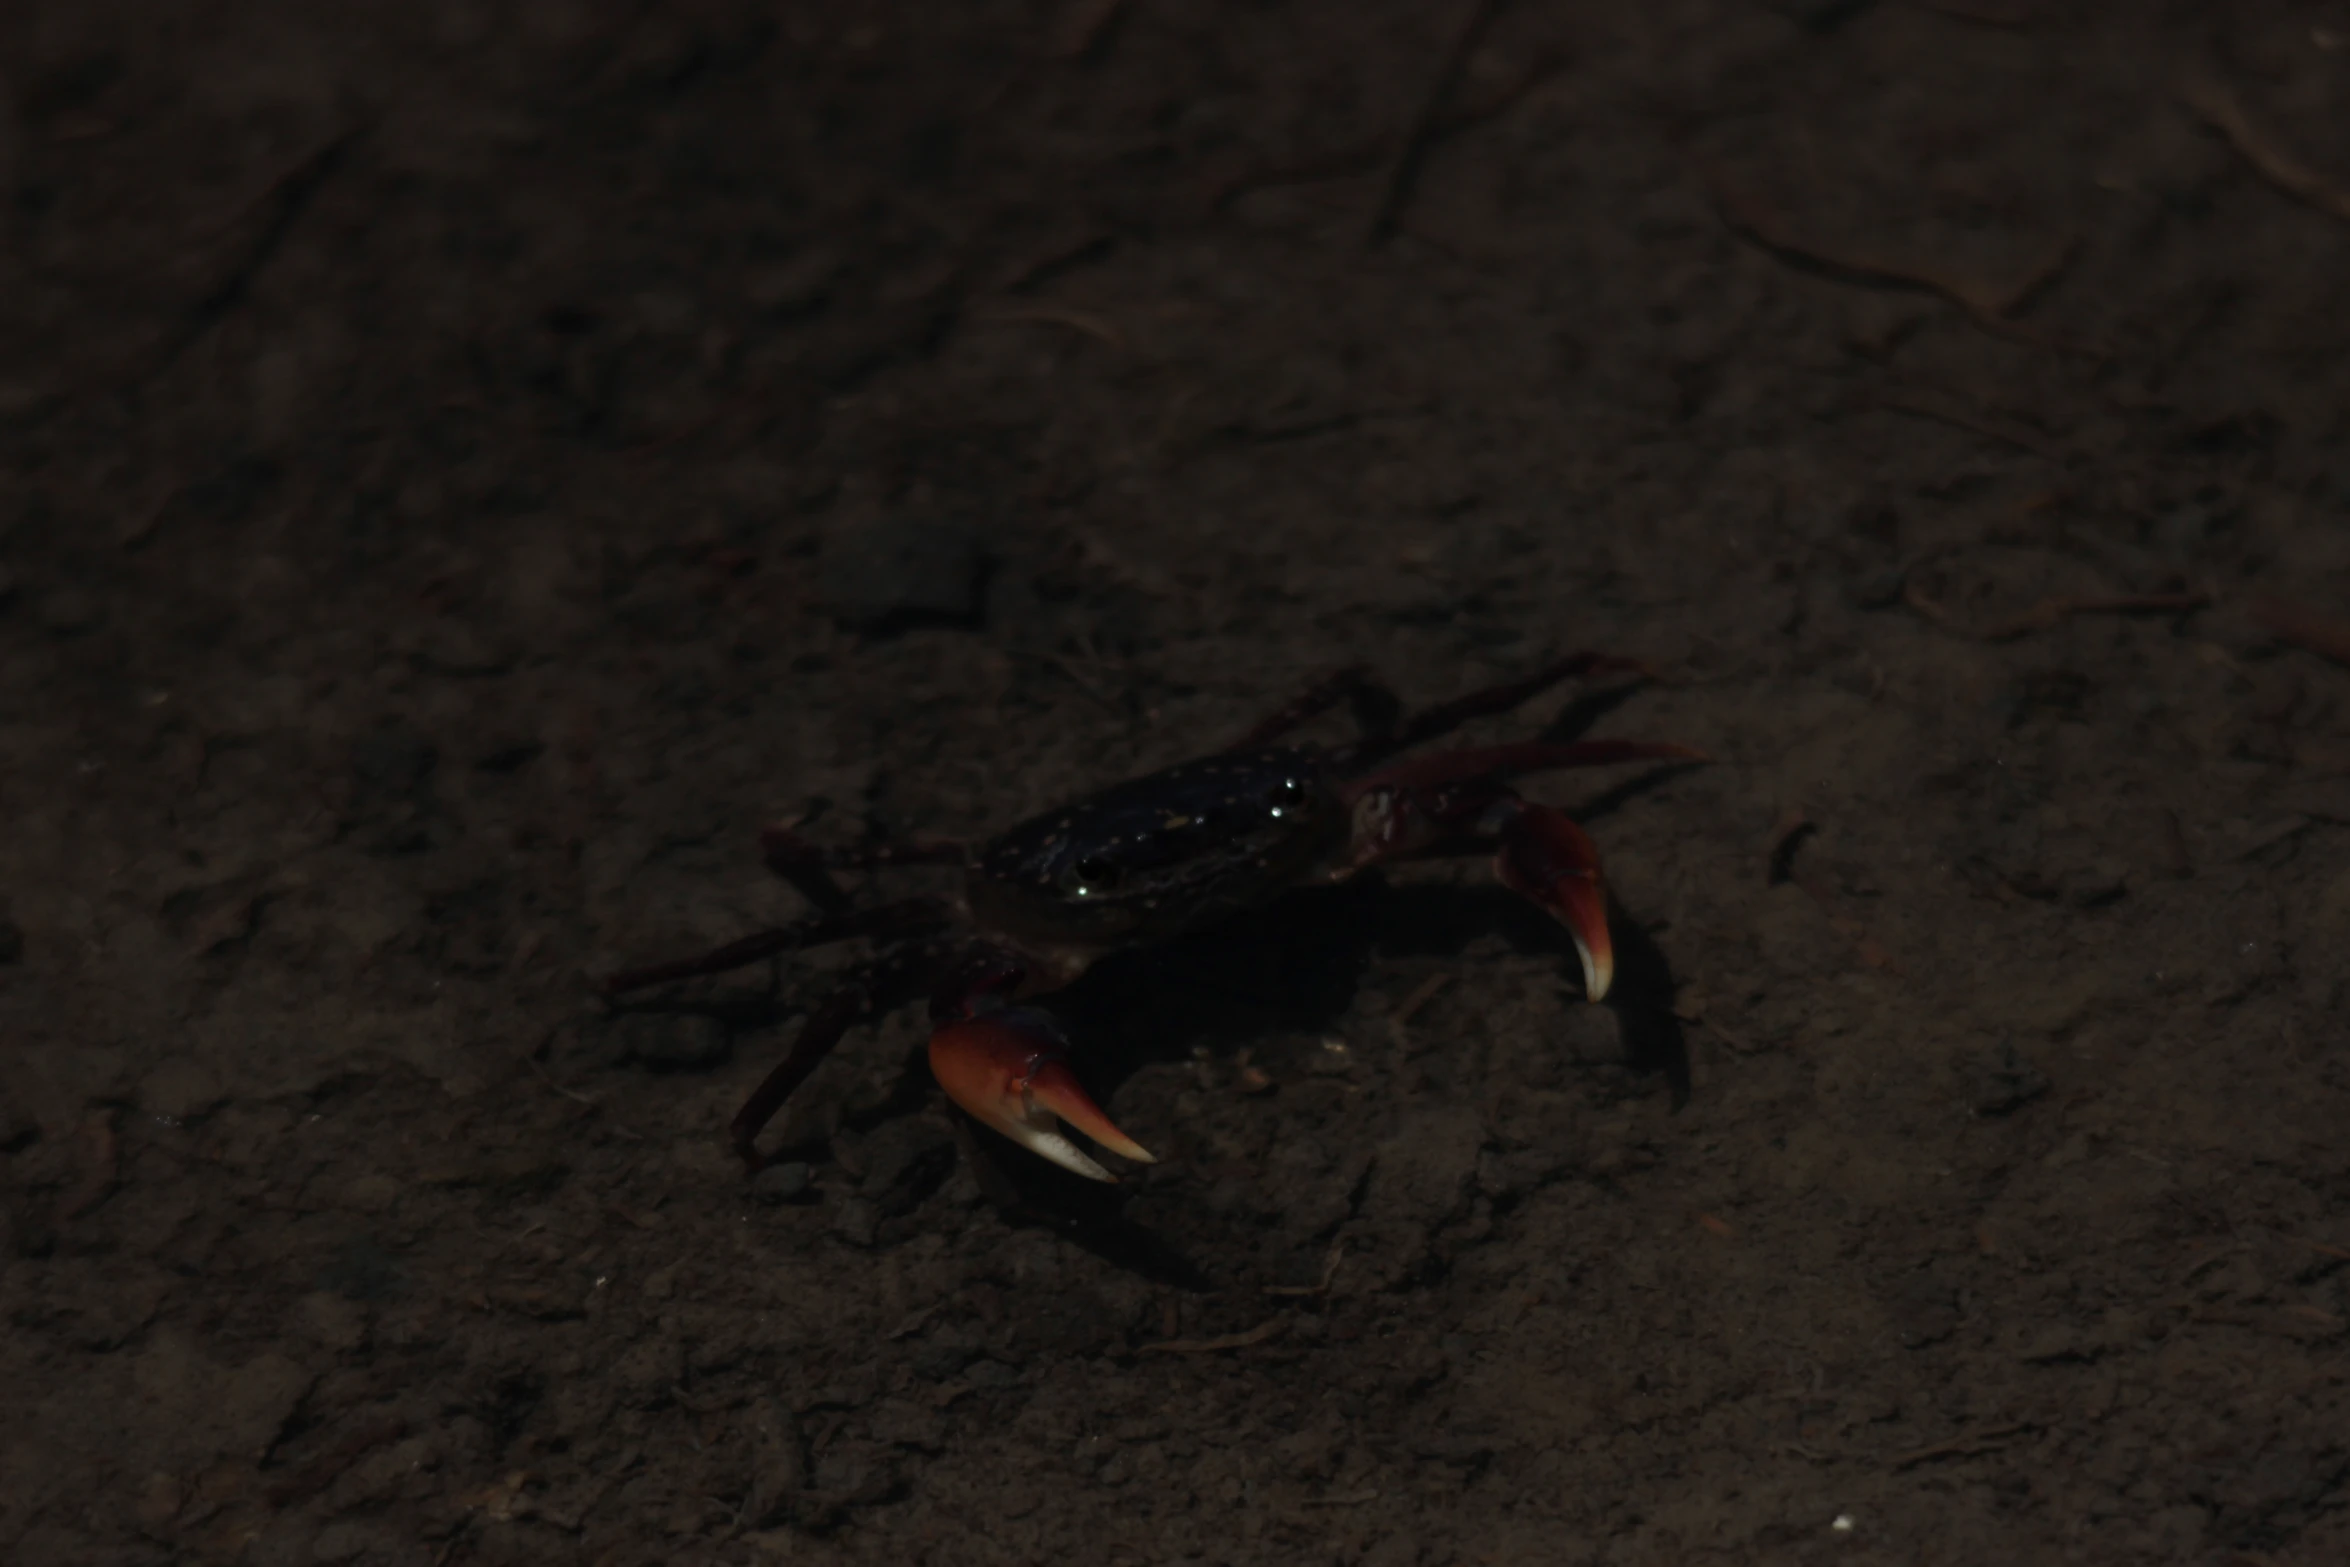 crab crawling on the ground in a dark environment